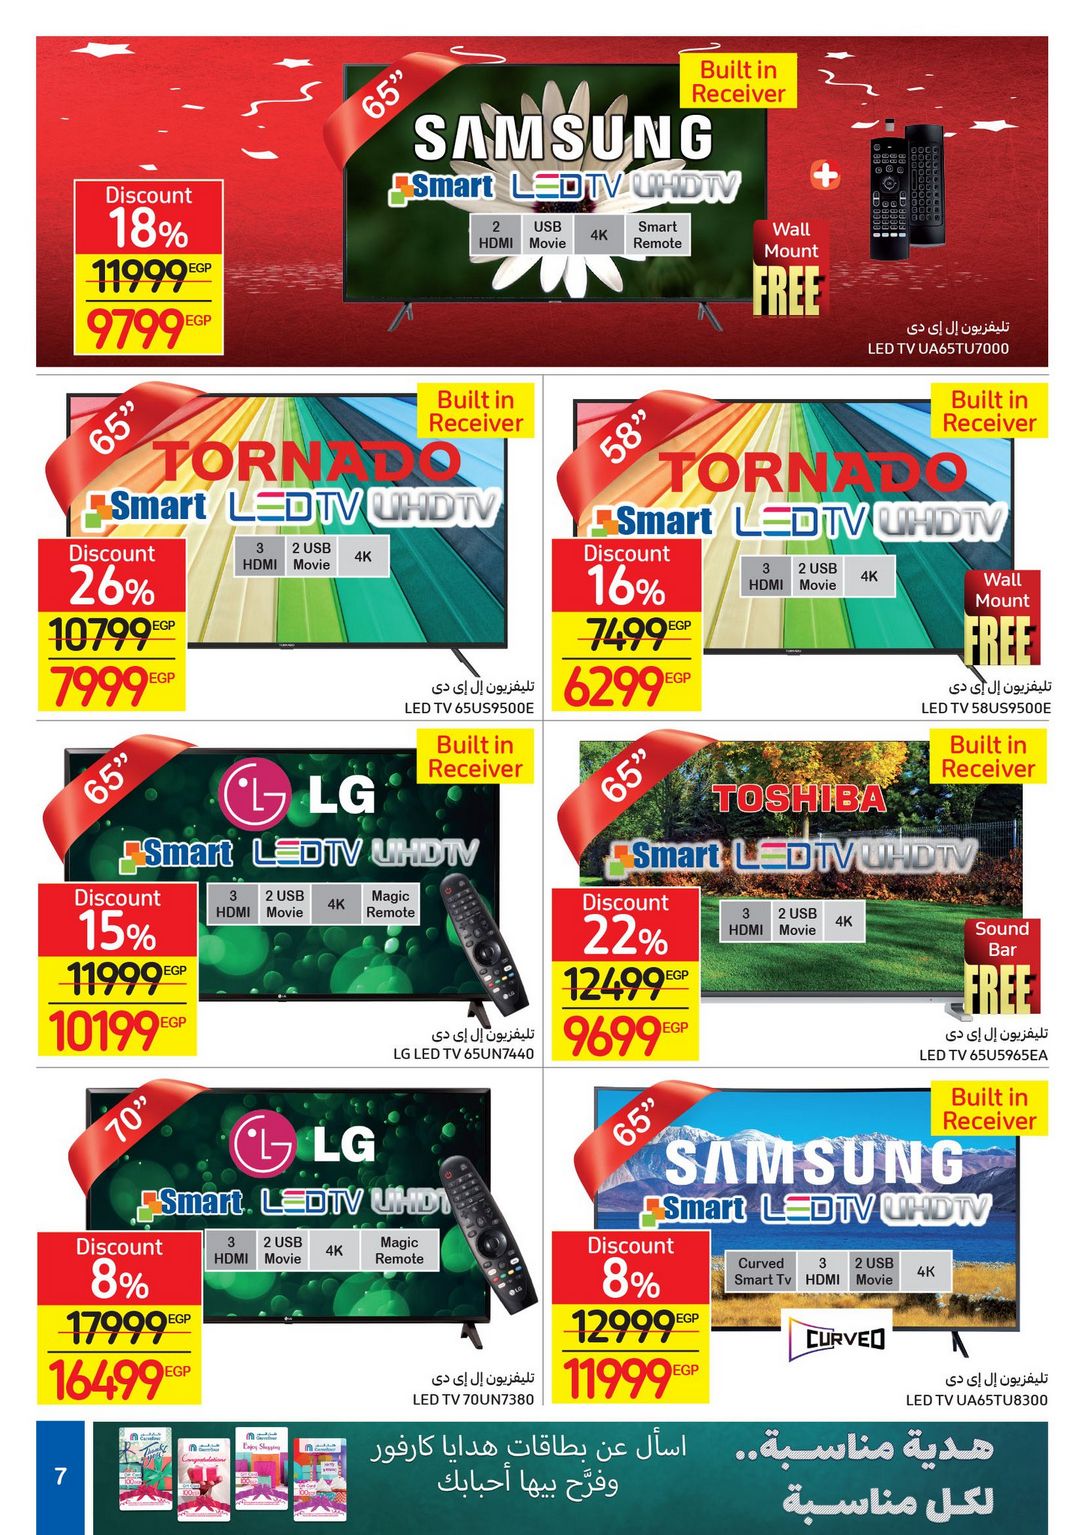 Carrefour Anniversary Offers till 18/2/2021 | Carrefour Egypt 8